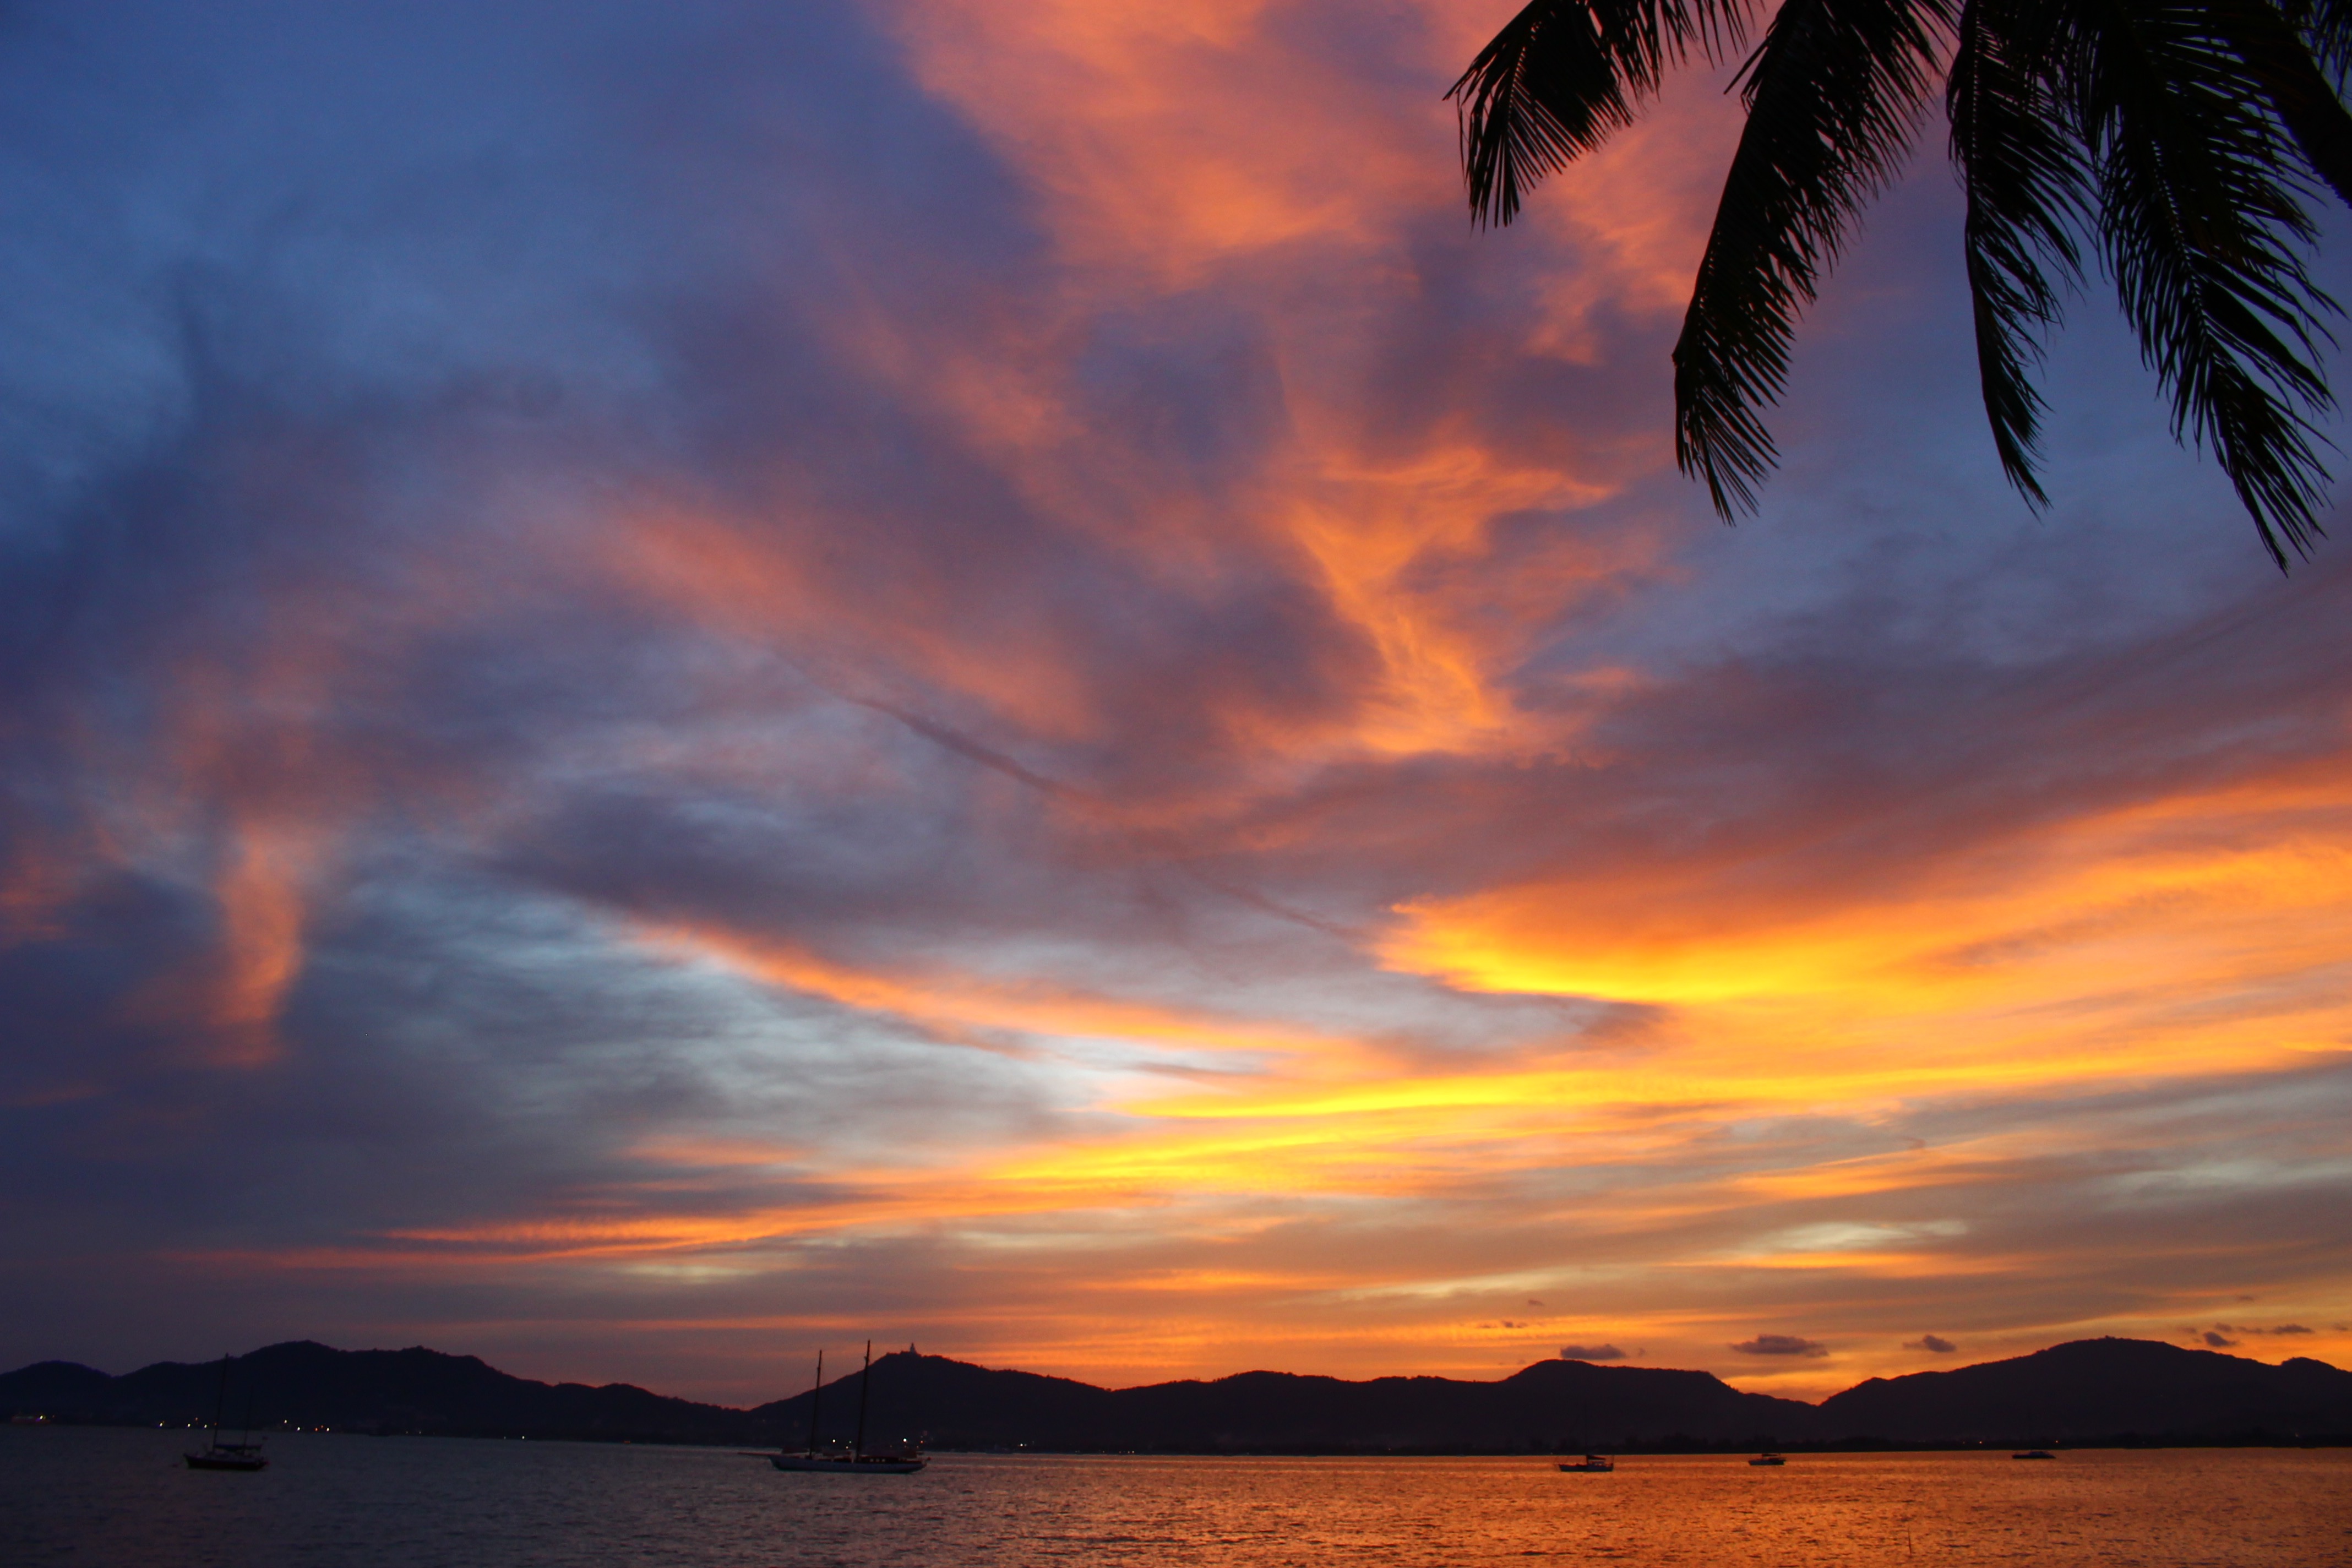 Cannot wait to return to Thailand for more glorious Thai sunsets!